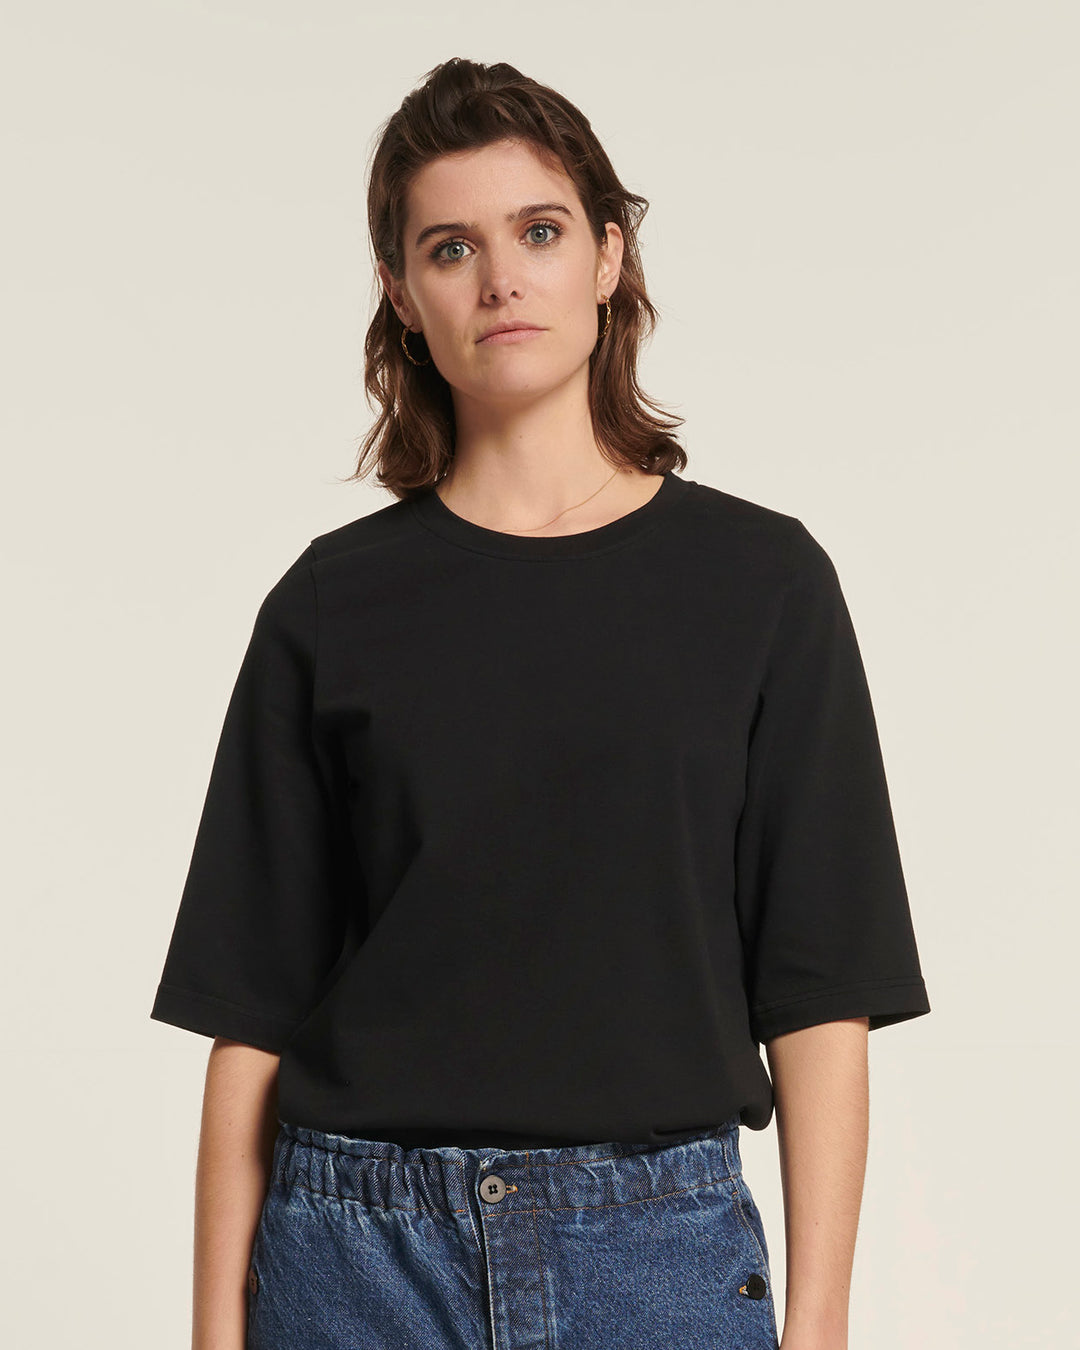 New Optimist womenswear Rondine | T-shirt with elbow-length sleeves T-shirt